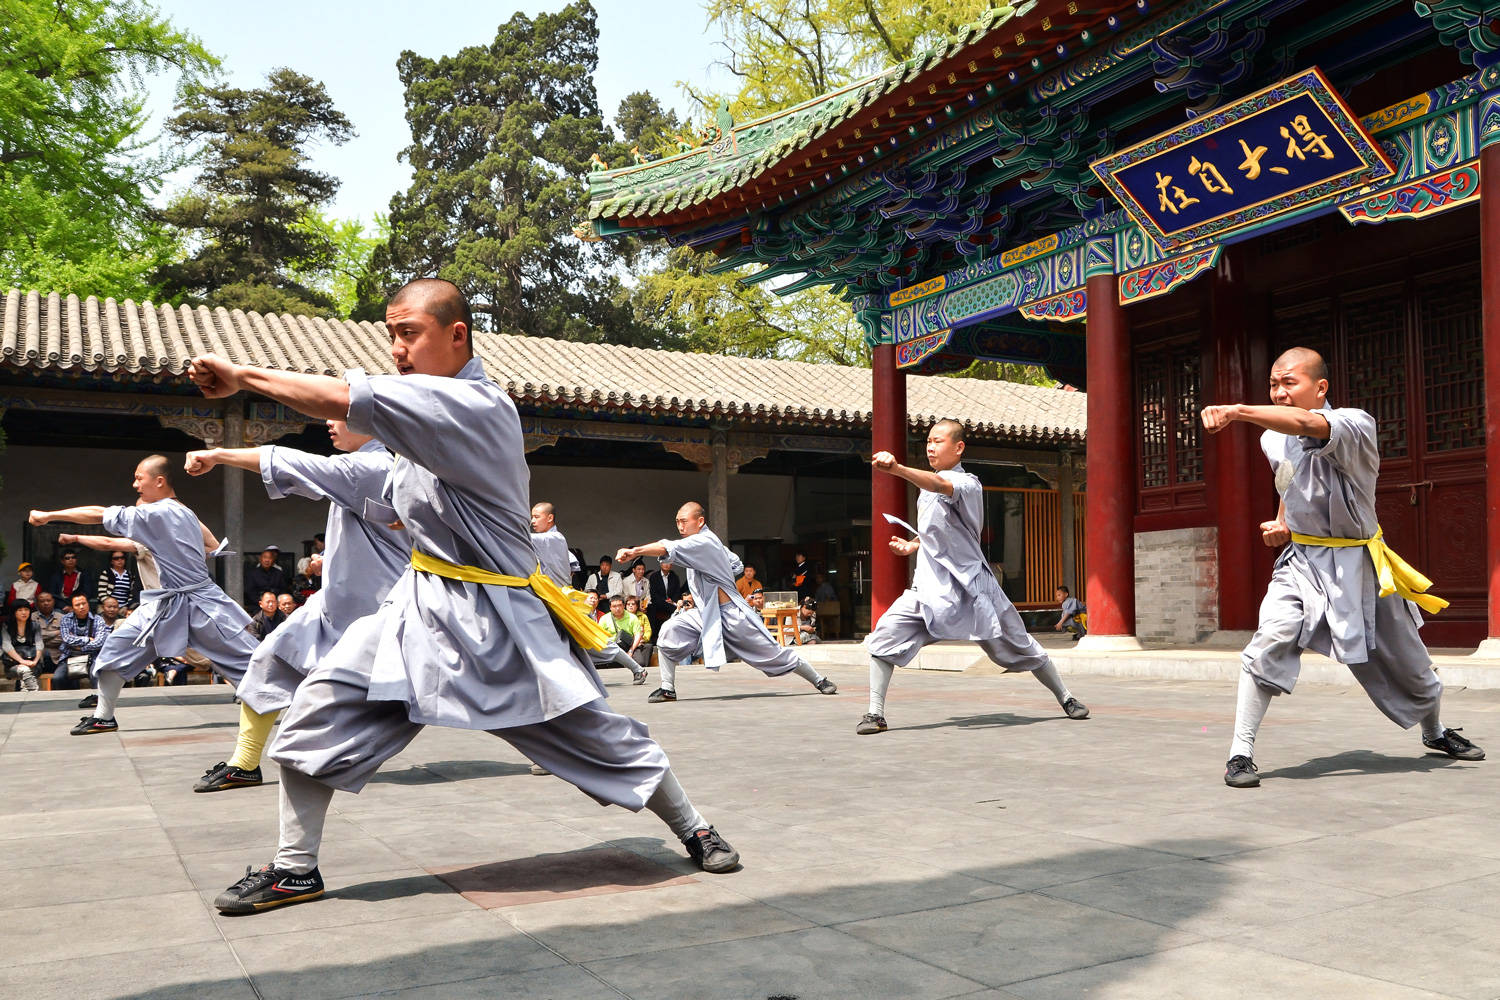 Majestic Display of Kung Fu Skills by Shaolin Temple Monks Wallpaper